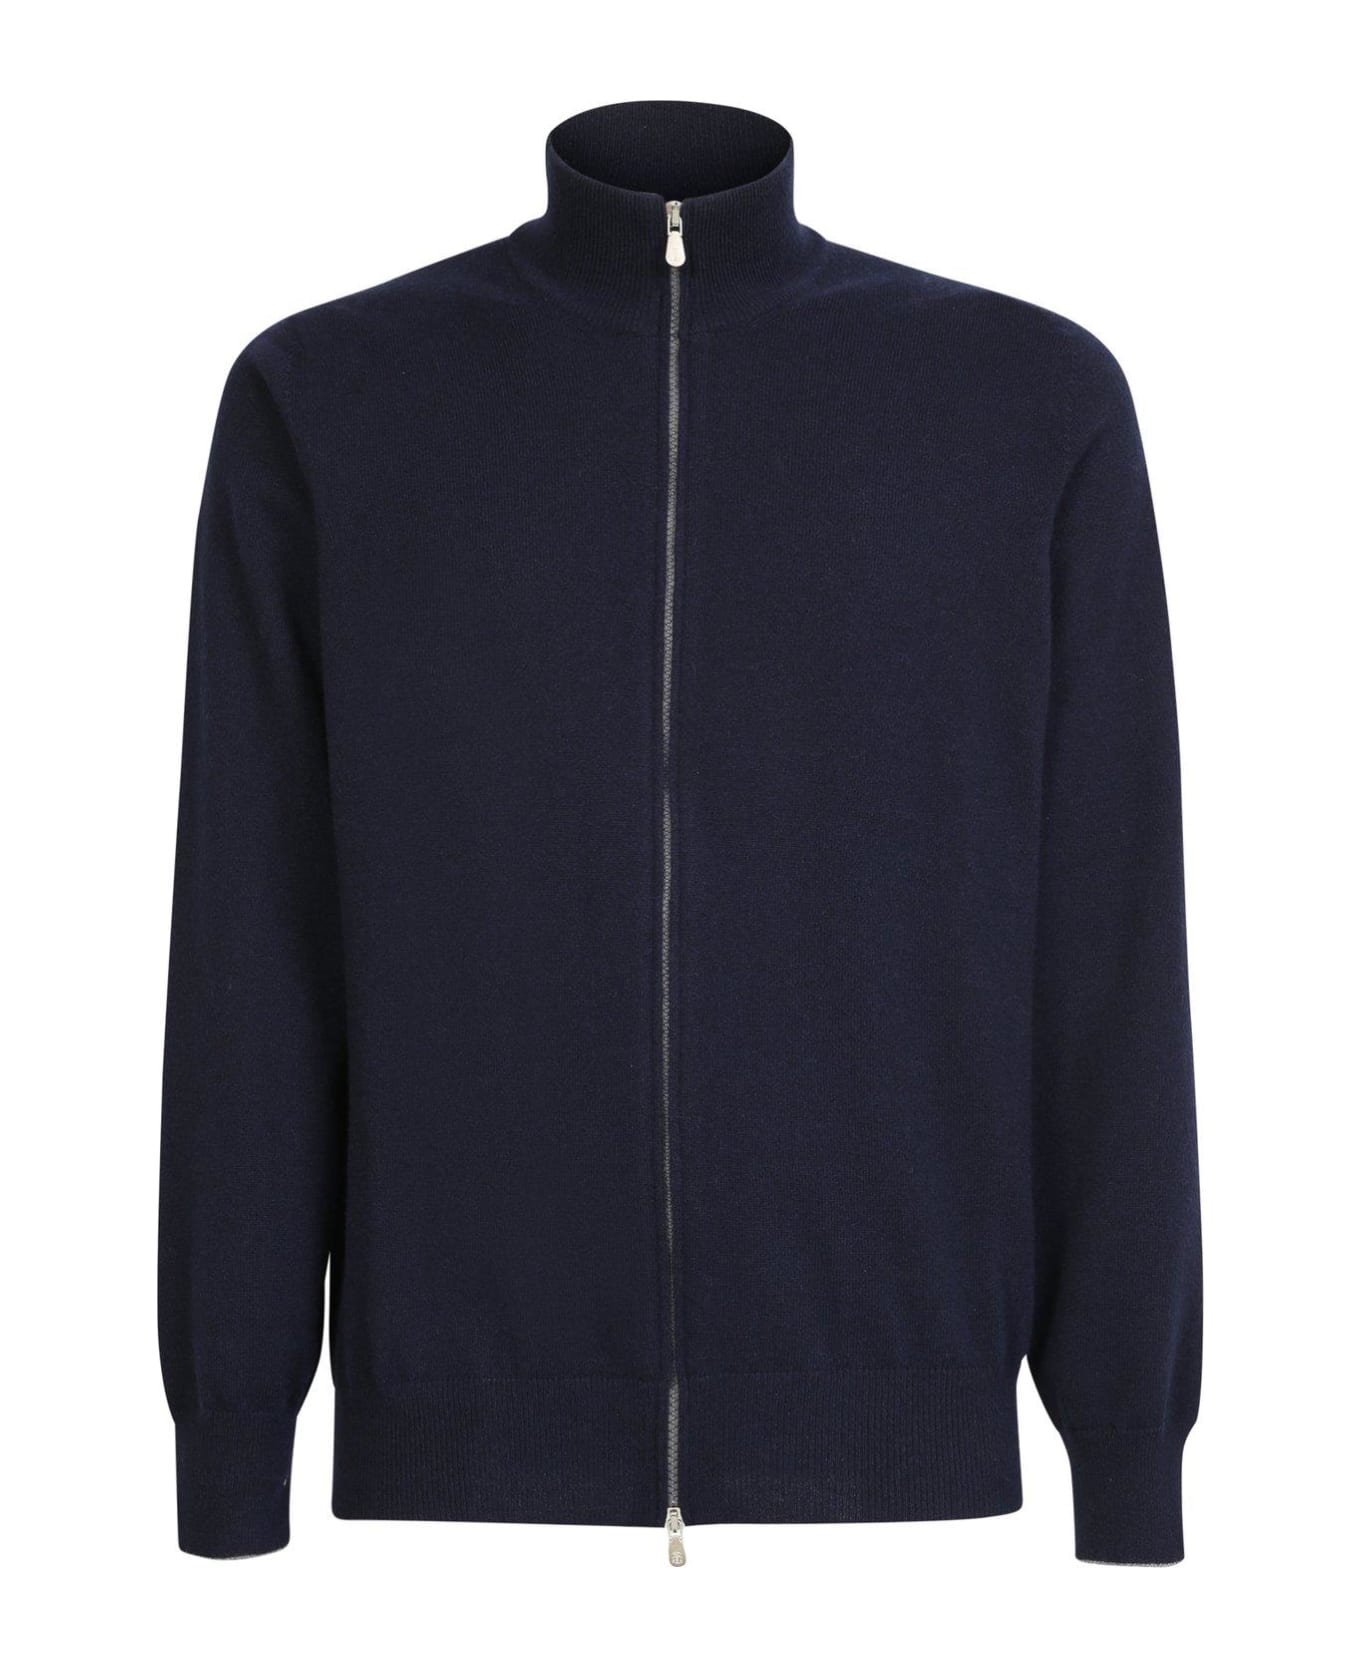 Brunello Cucinelli Zipped Knitted Cardigan - Navy